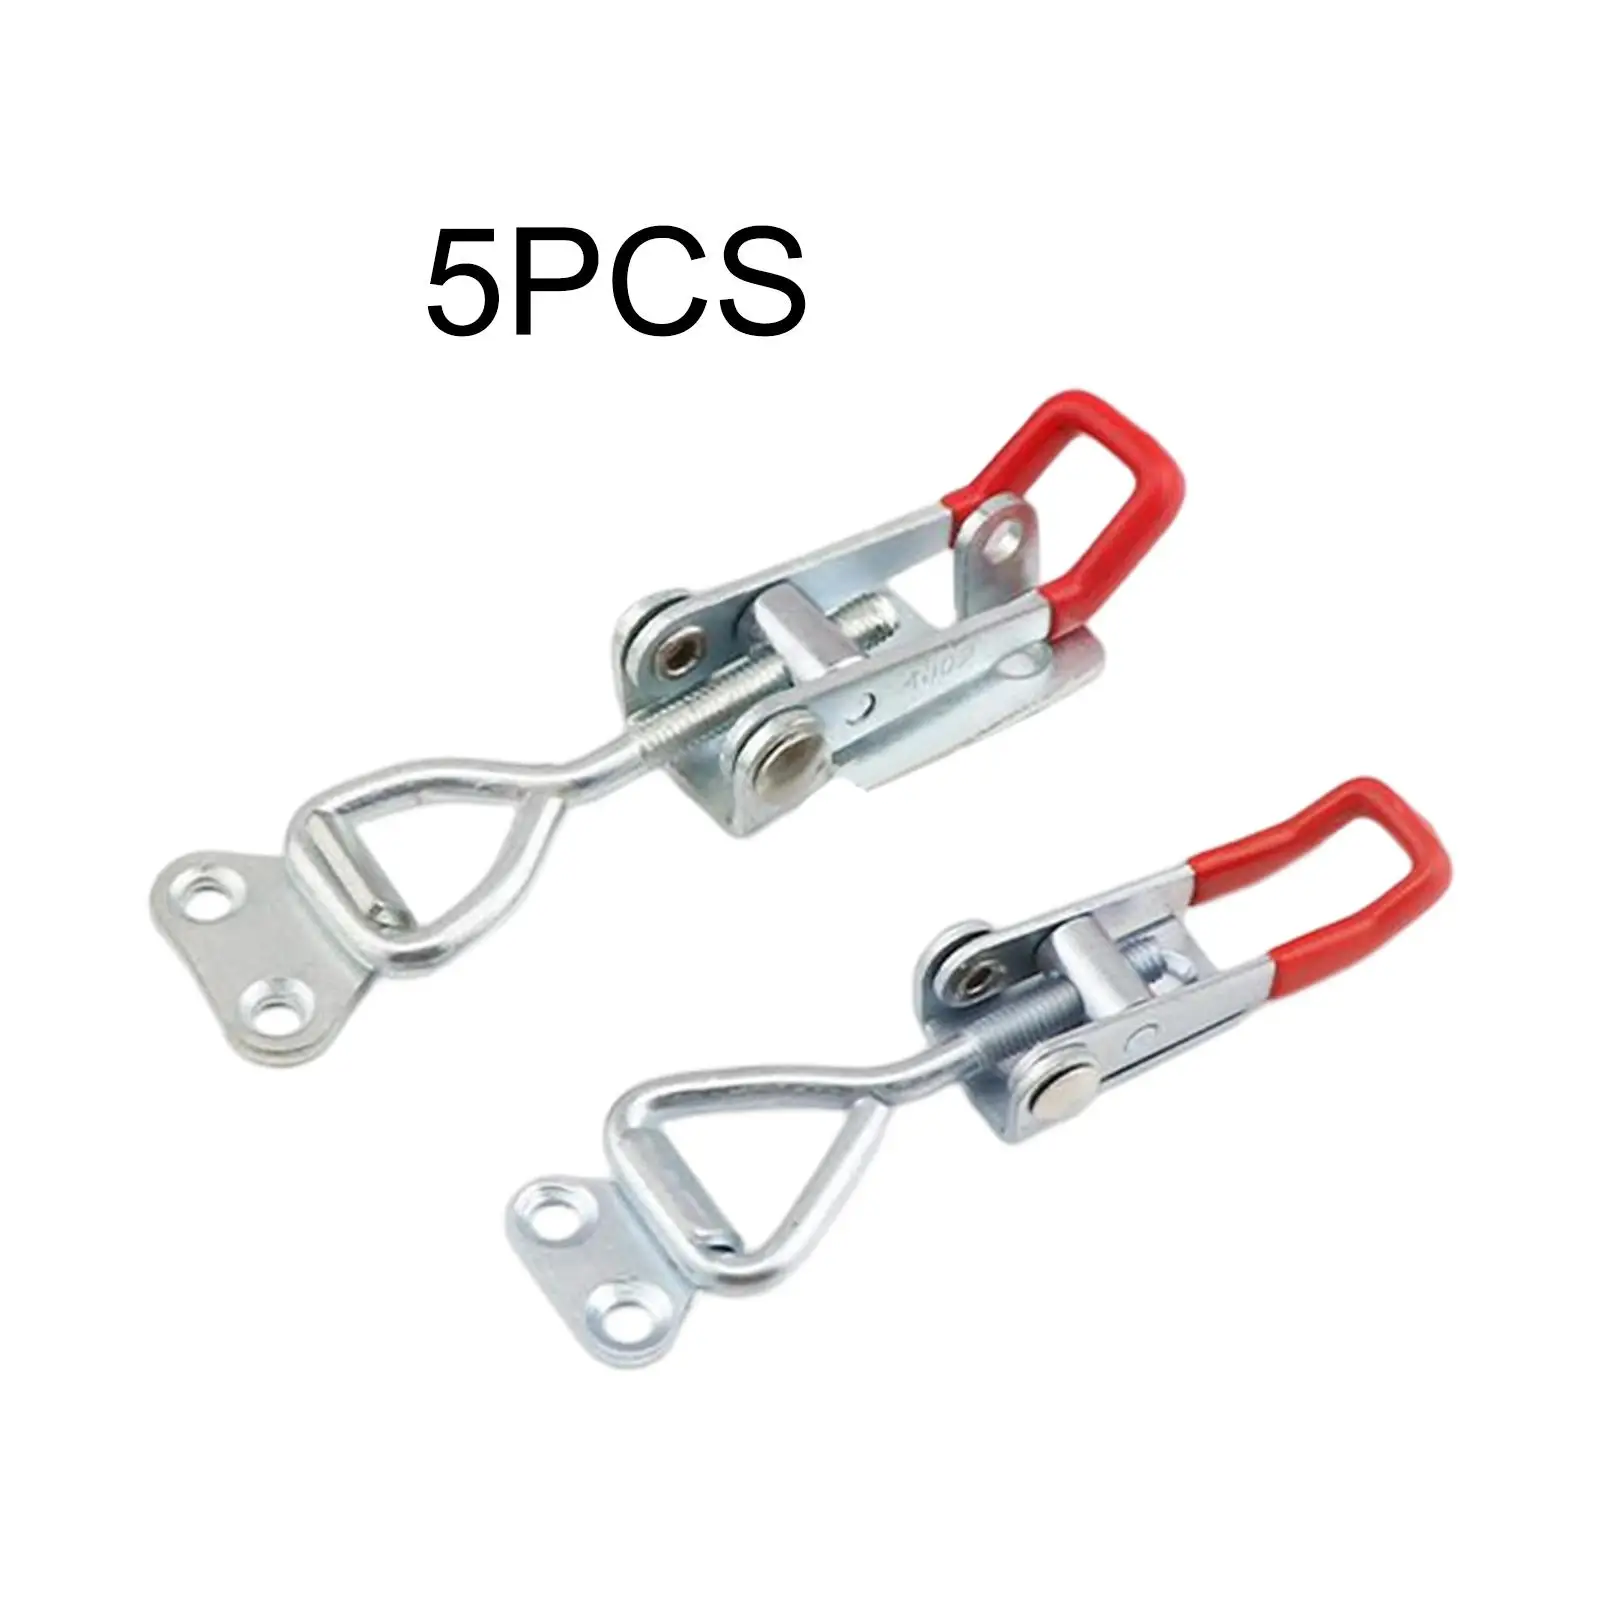 5x Push Pull Latch Clamp Iron Horizontal Quick Release Durable Reliable for Storage Locker Freezer Door Cabinet Lid Toy Box DIY